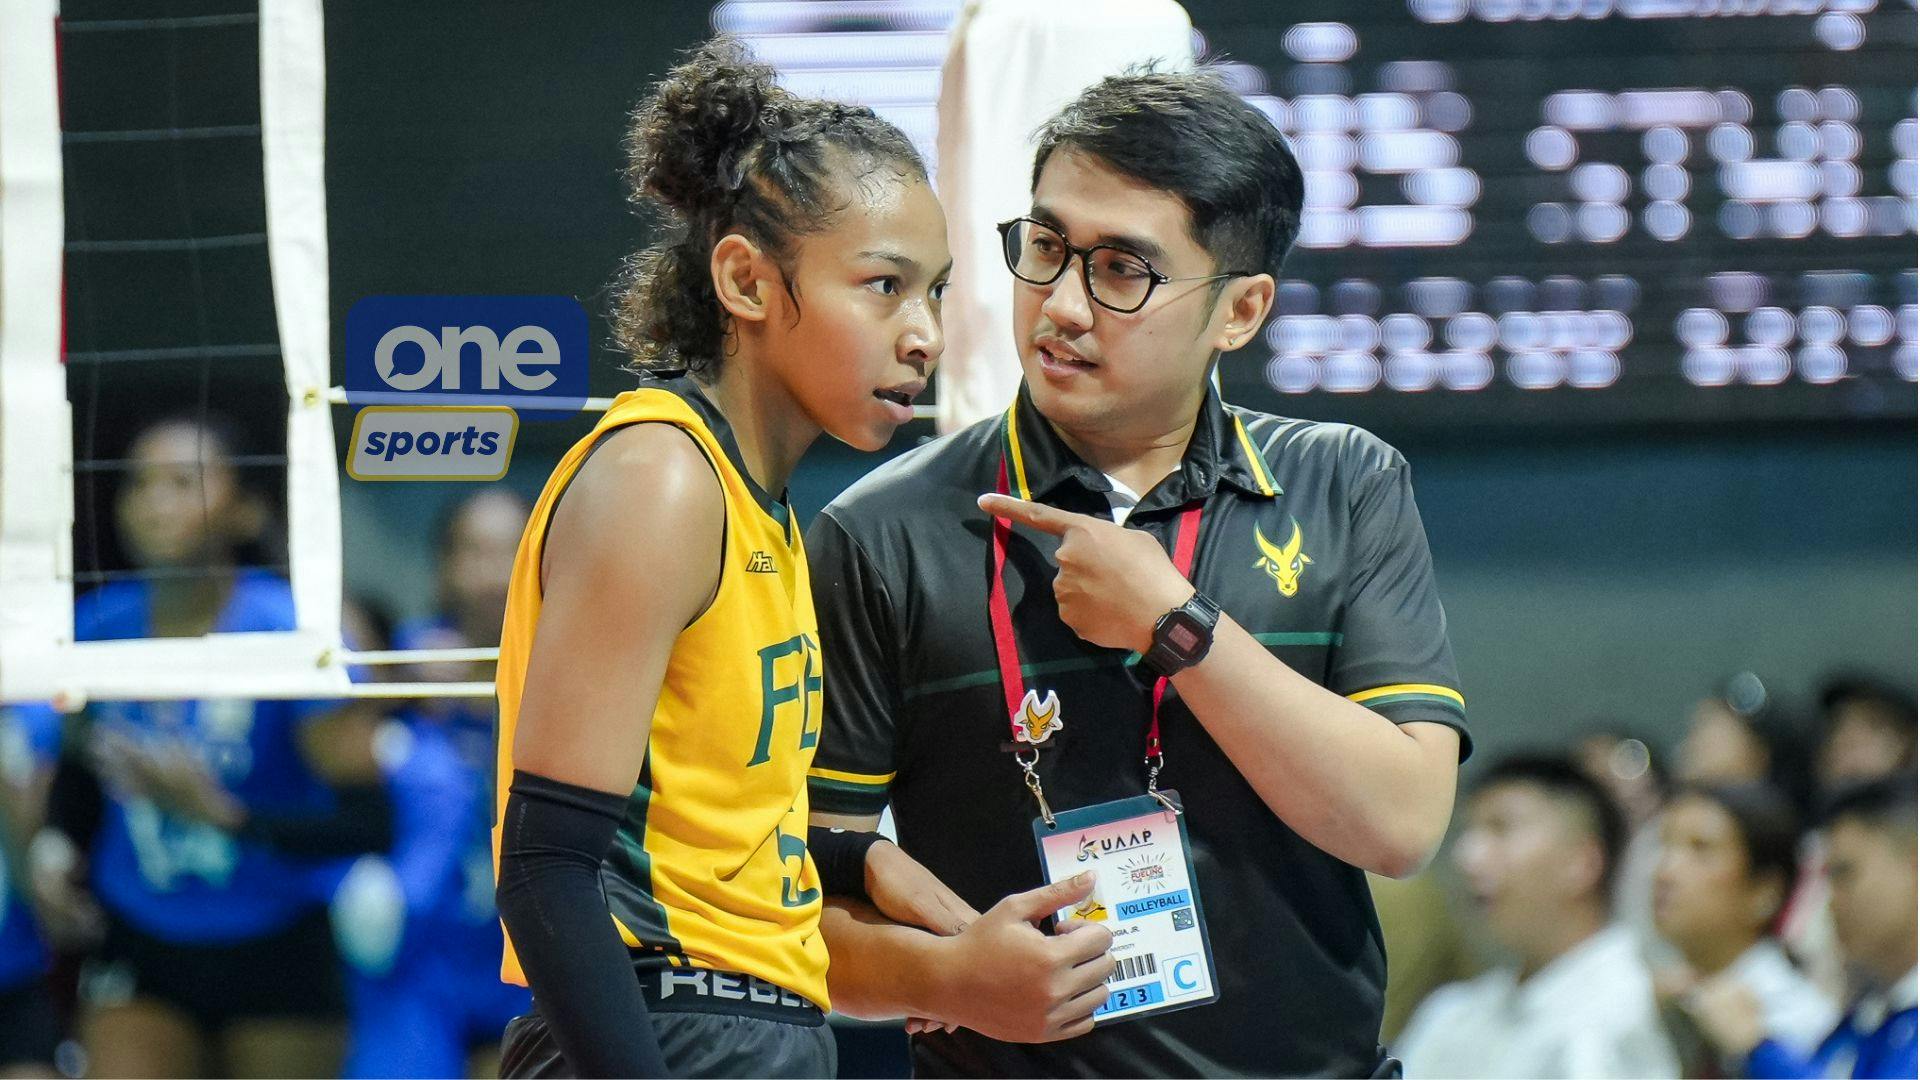 UAAP: What will it take to beat UST, La Salle, NU? Coach Manolo Refugia sets goal for FEU in round 2